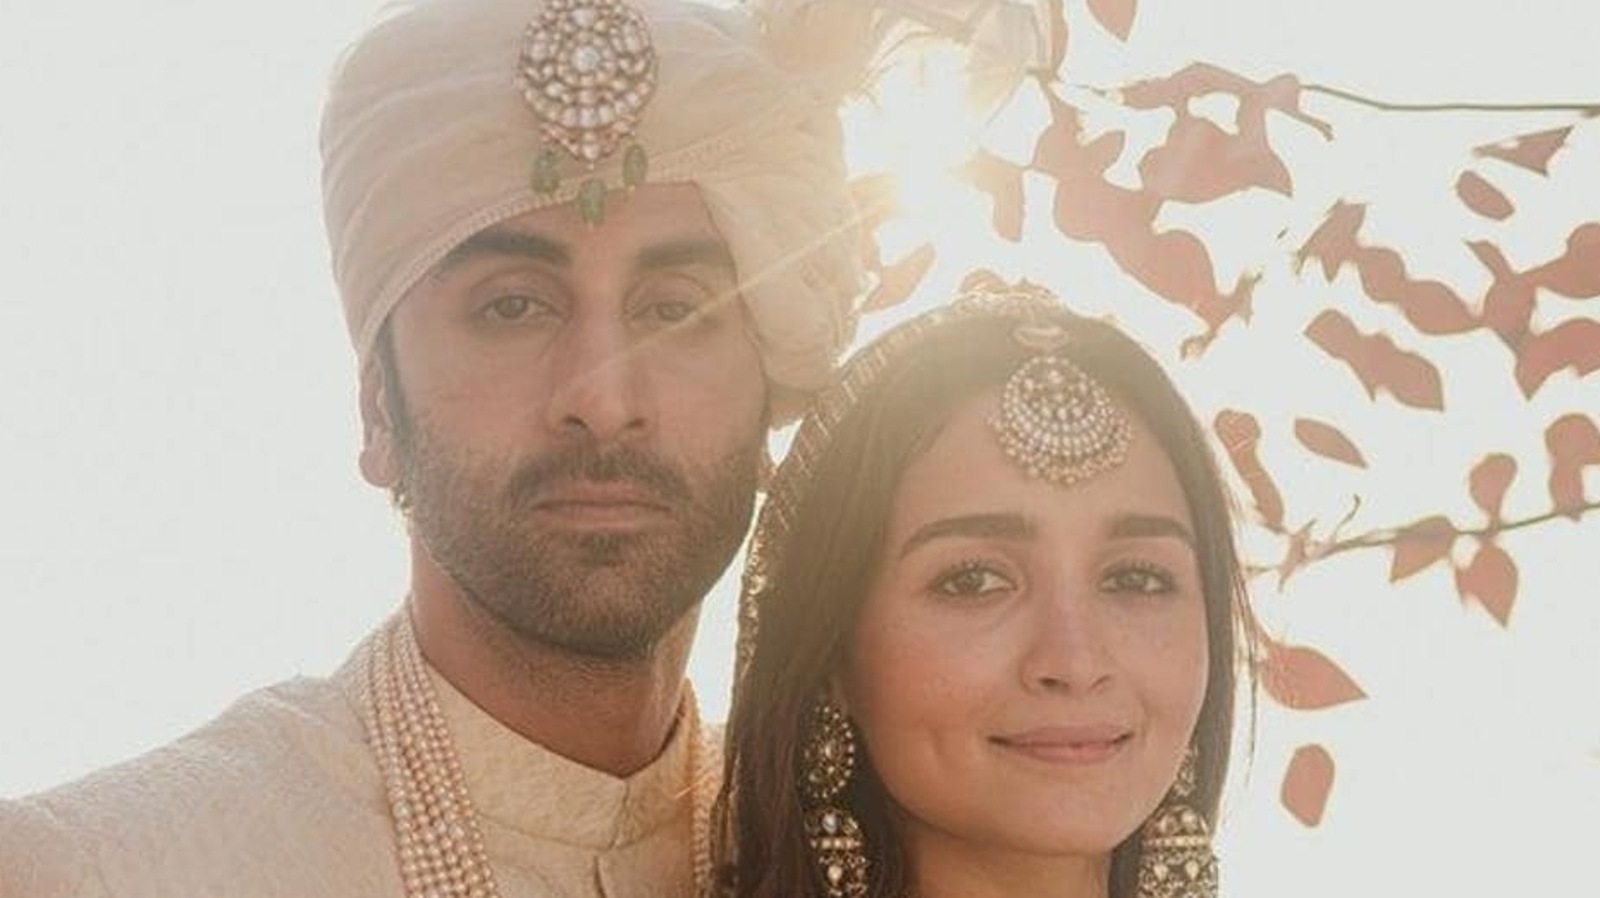 Ranbir Kapoor thought he needed ‘tangdi kebab’ in life but is happy with ‘tadka in dal chawal’ Alia Bhatt now